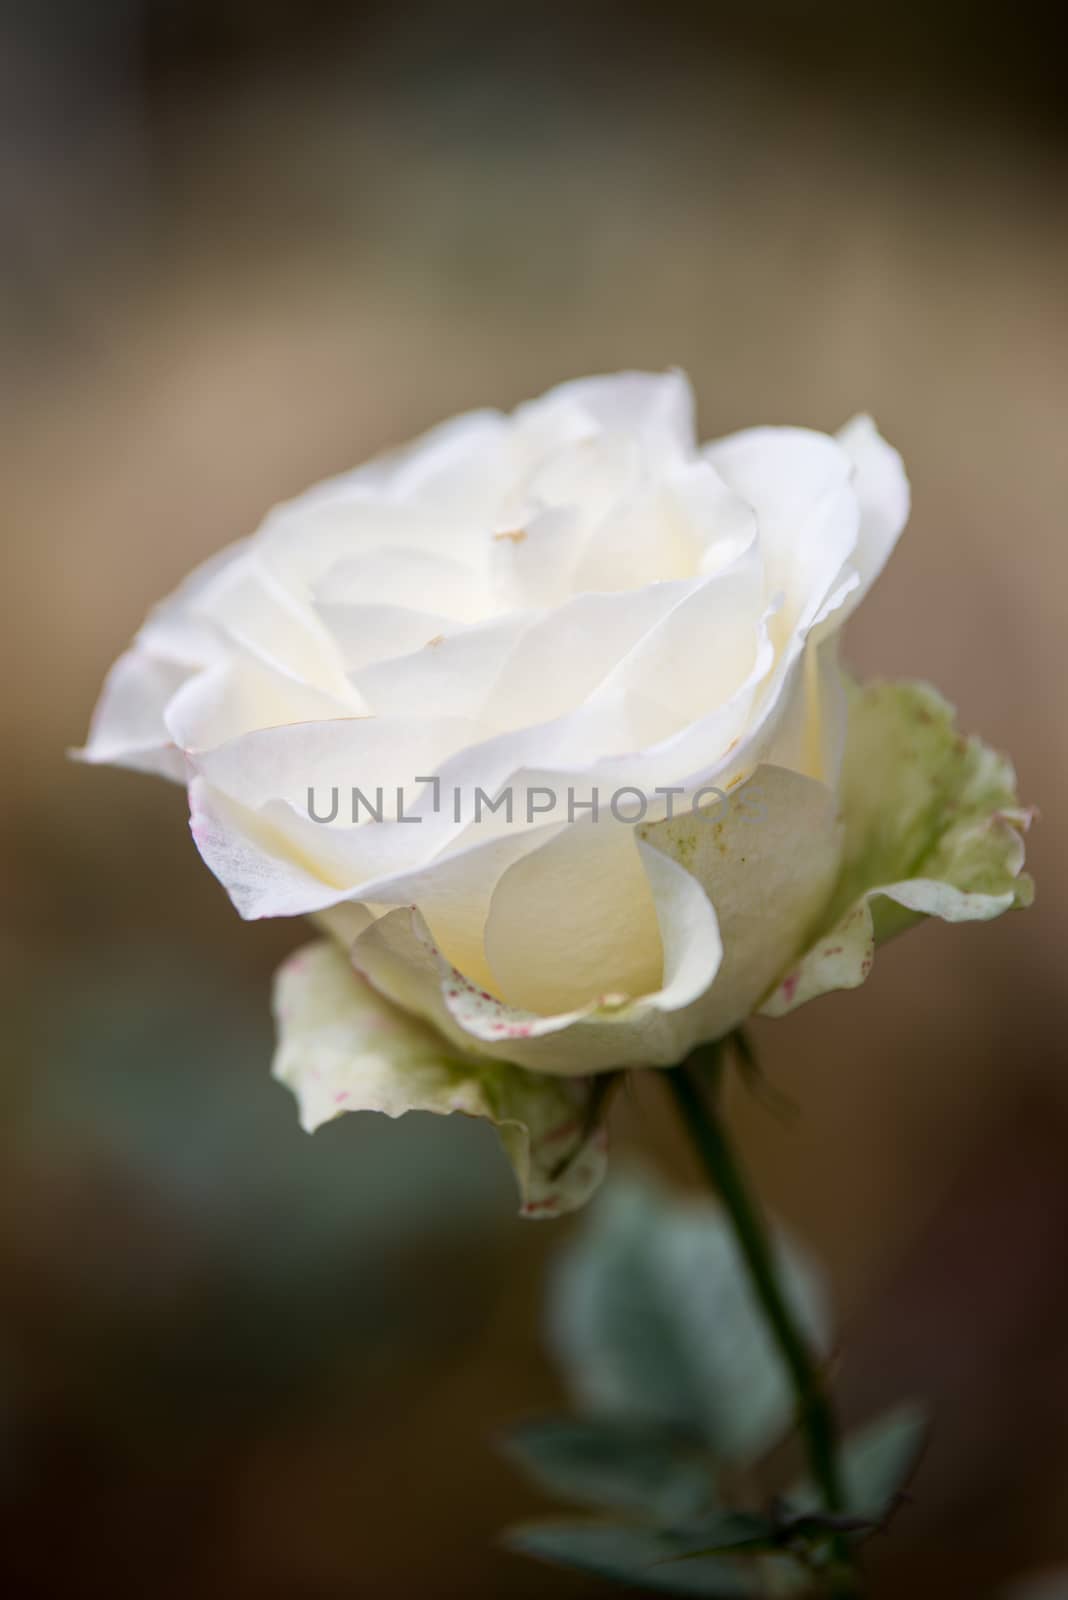 White rose flowers with buds in garden by jakgree